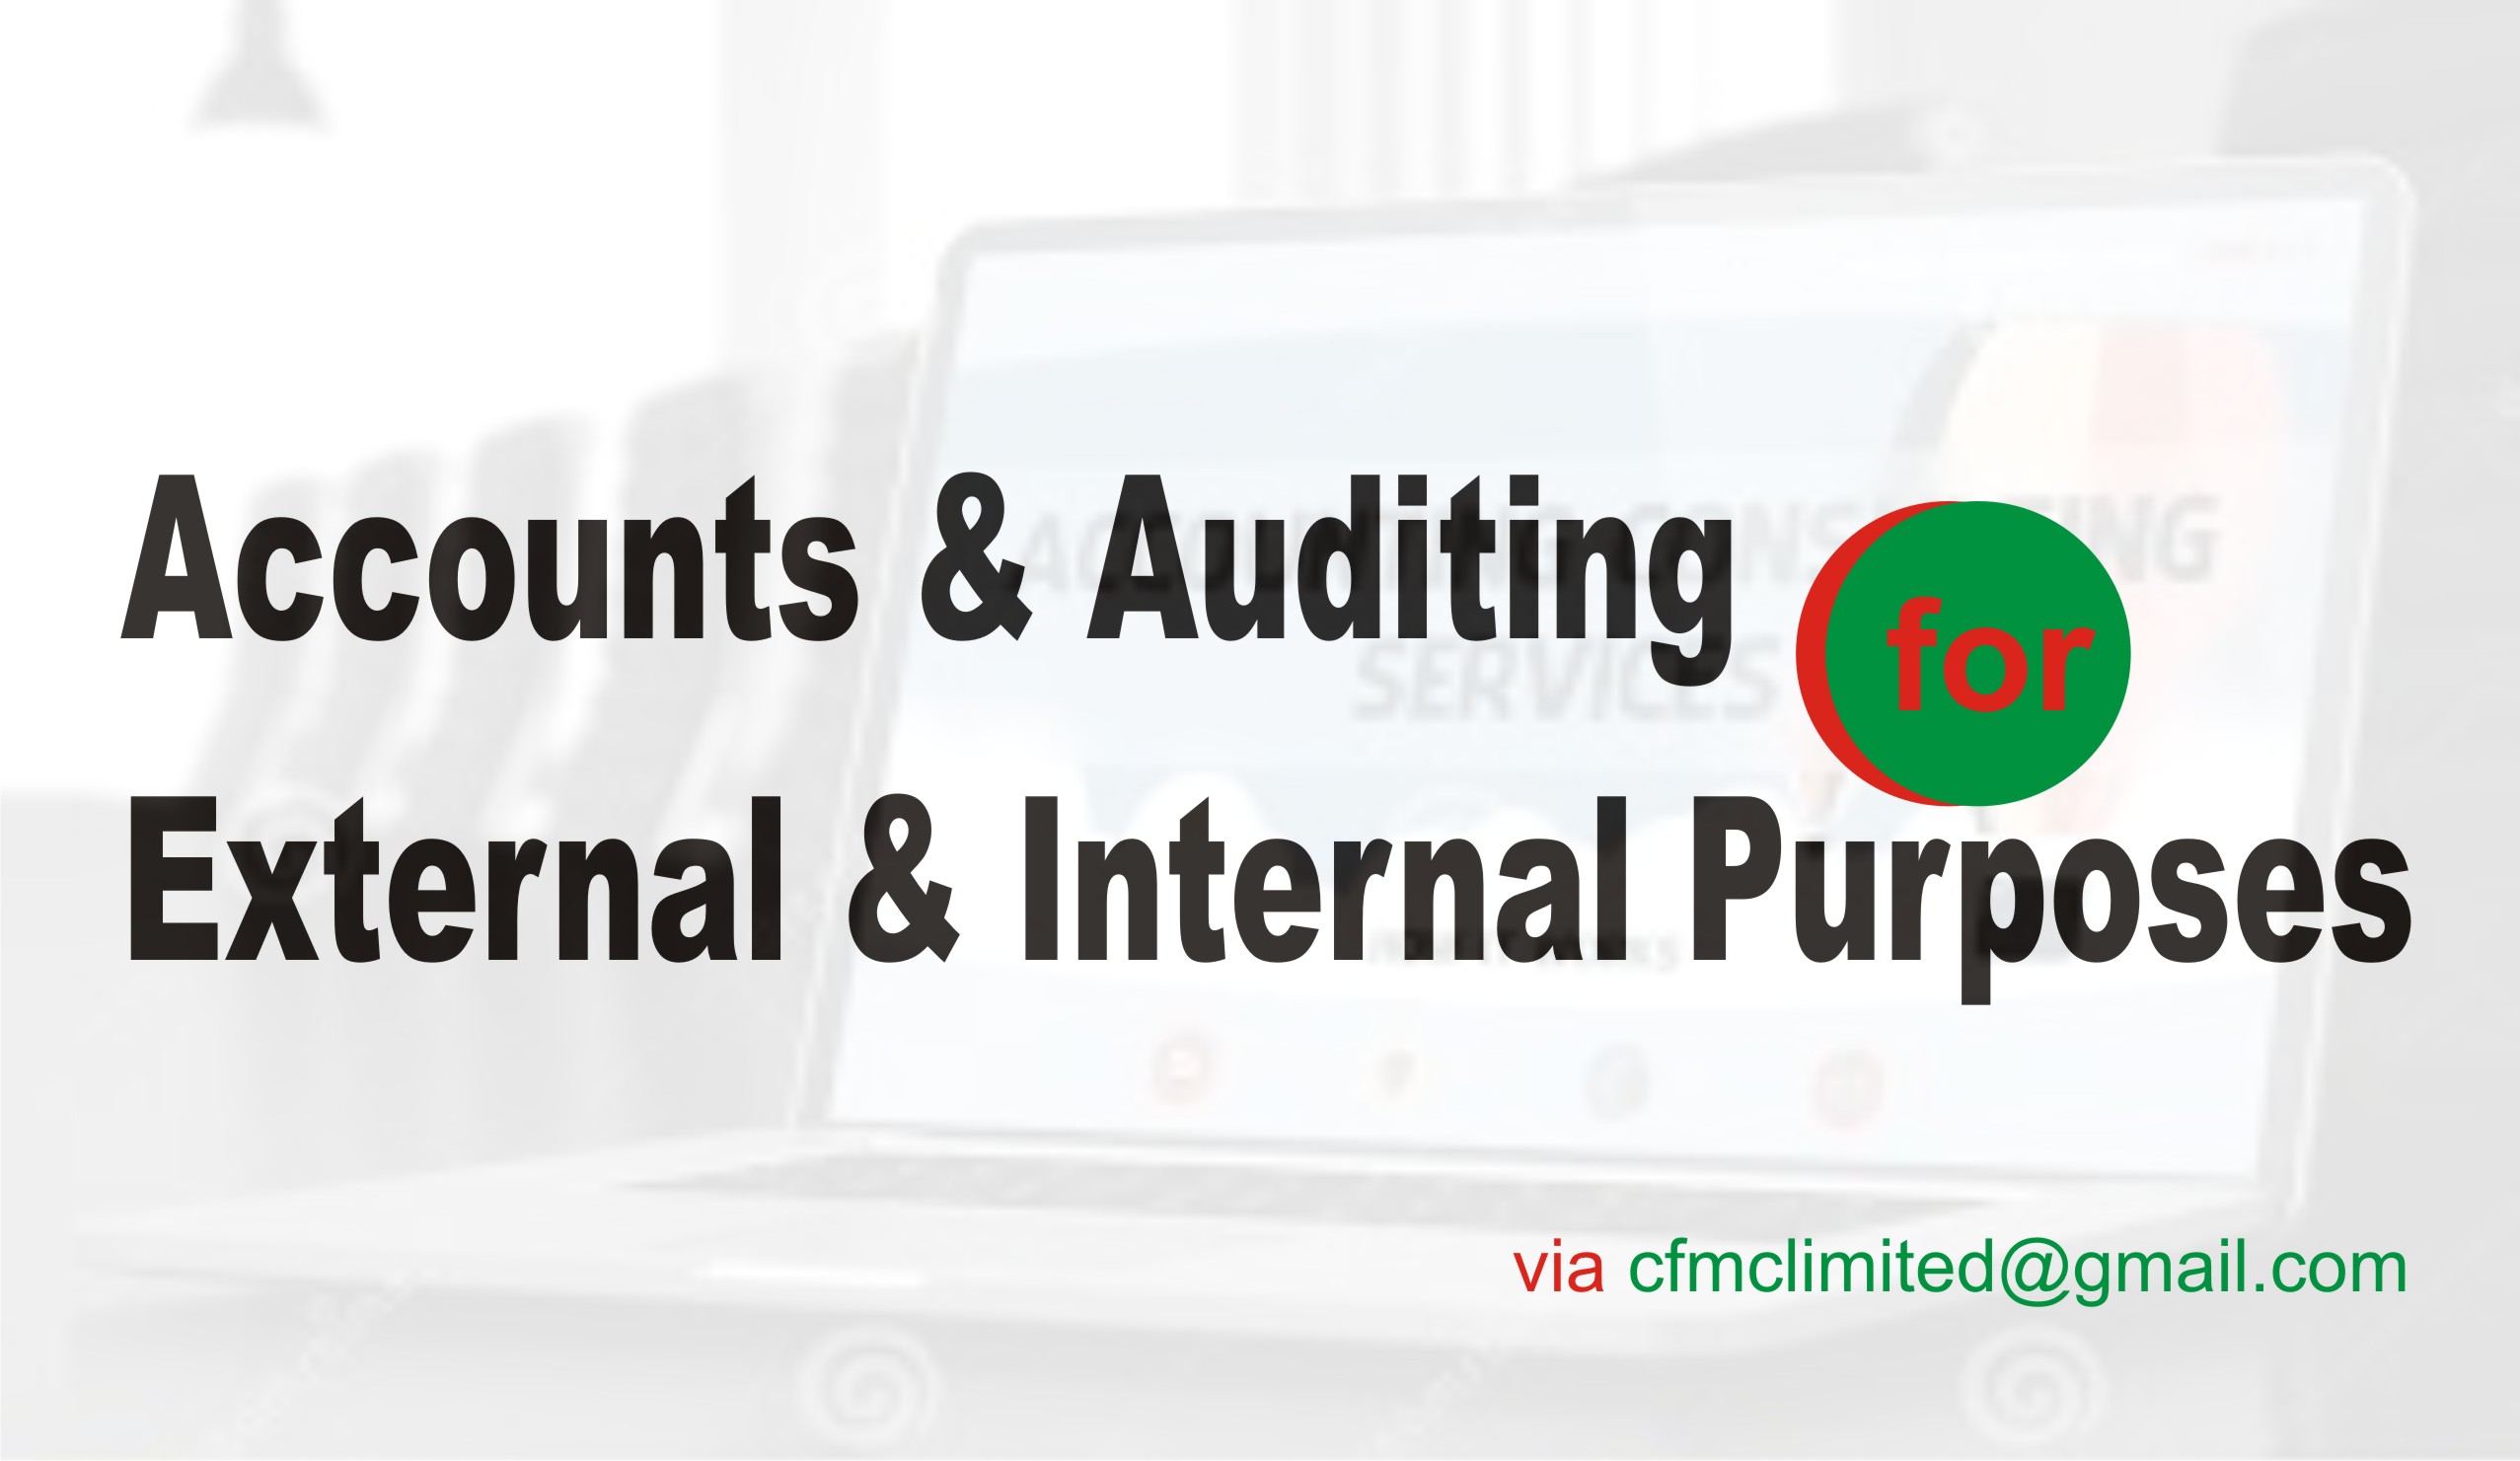 How Much Do YoHow Much Do You Need Accounting and Auditing Services?u Need Accounting and Auditing  Services